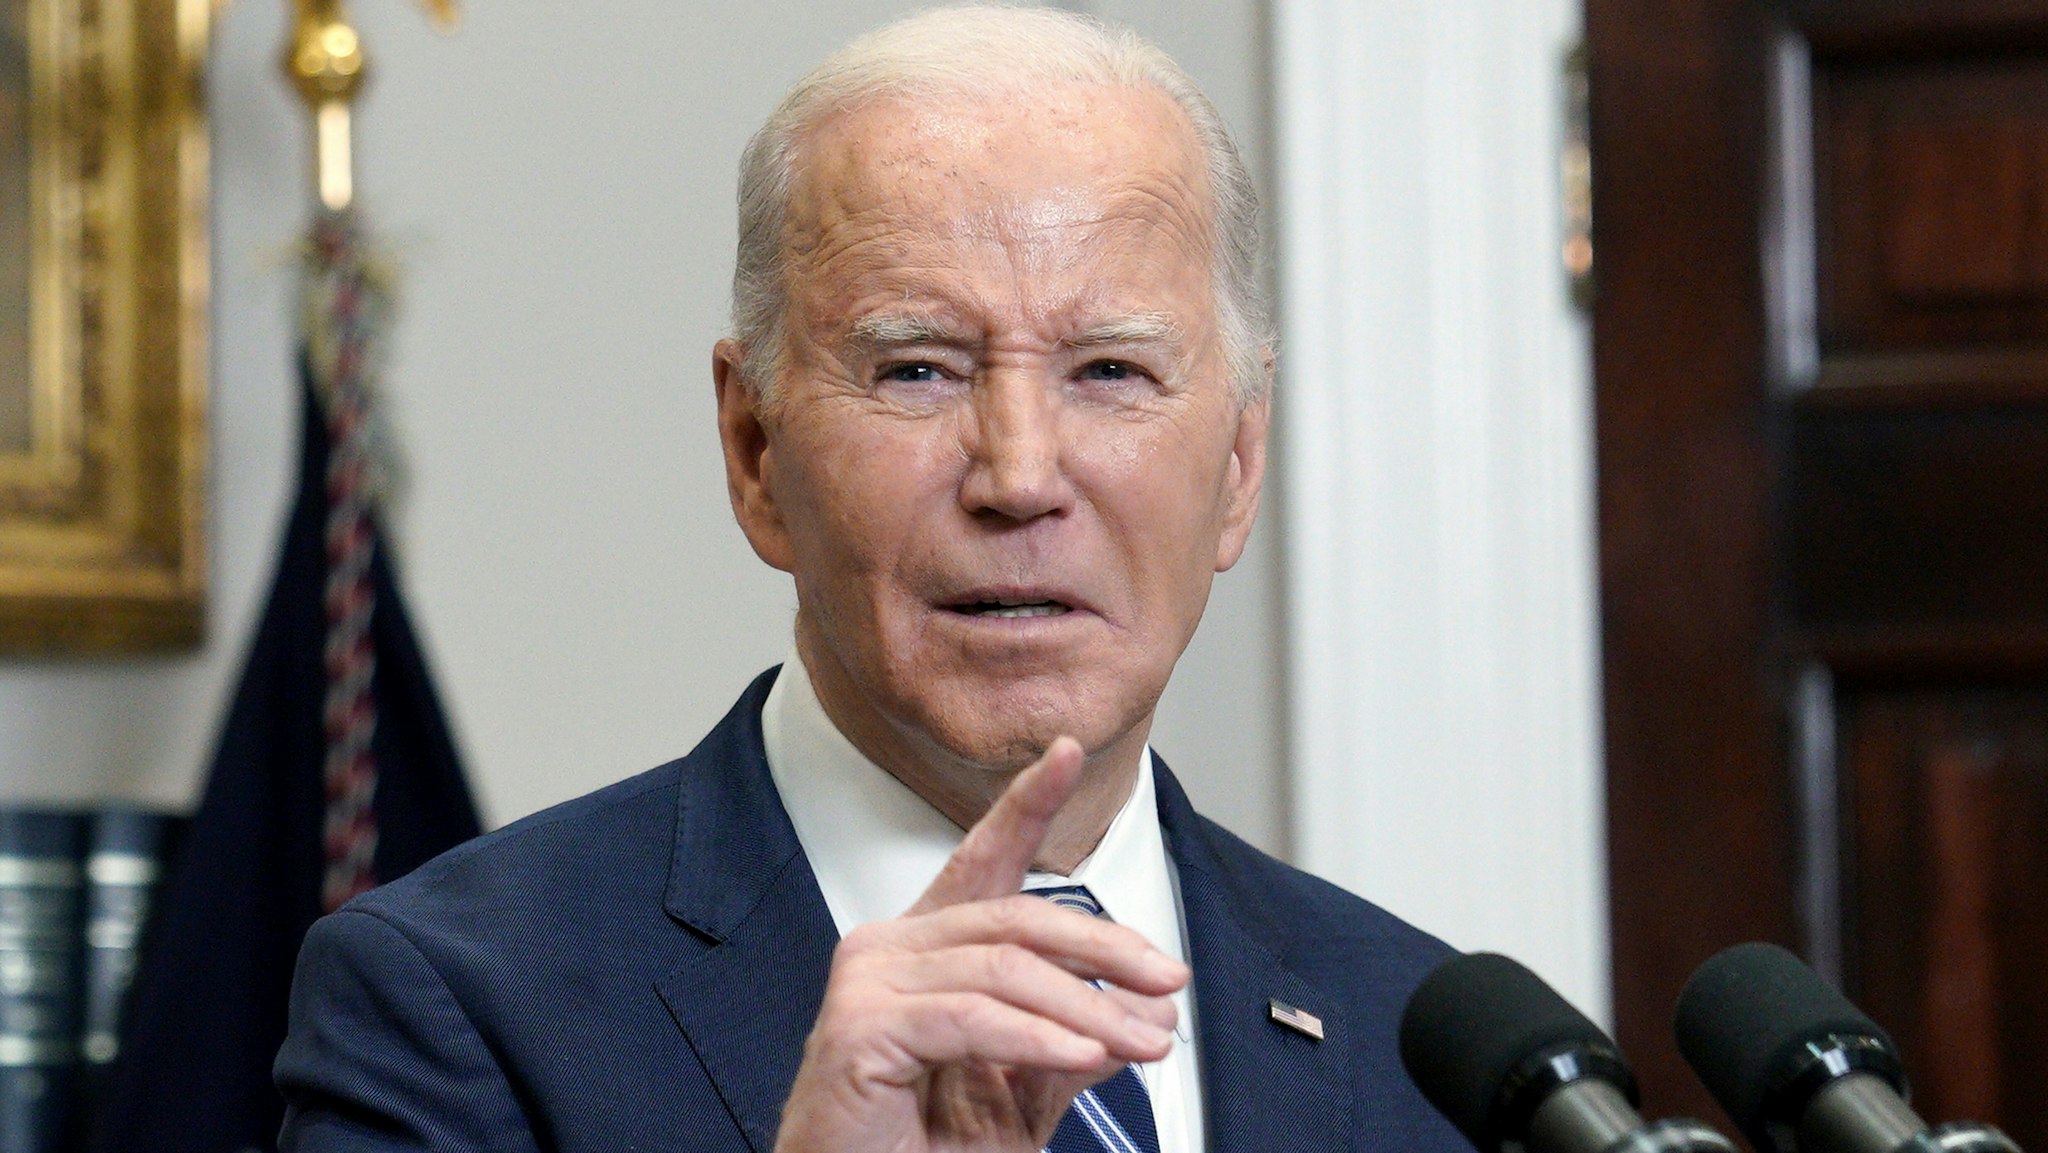 US President Joe Biden speaks on the death of Alexey Navalny, Russian opposition leader, in the Roosevelt Room of the White House in Washington, DC, US, on Friday, Feb. 16, 2024. Biden laid the blame for the death of activist Alexey Navalny, a leading opposition voice against Vladimir Putin, on the Russian president and said the moment called for US resolve to back its allies, including Ukraine.